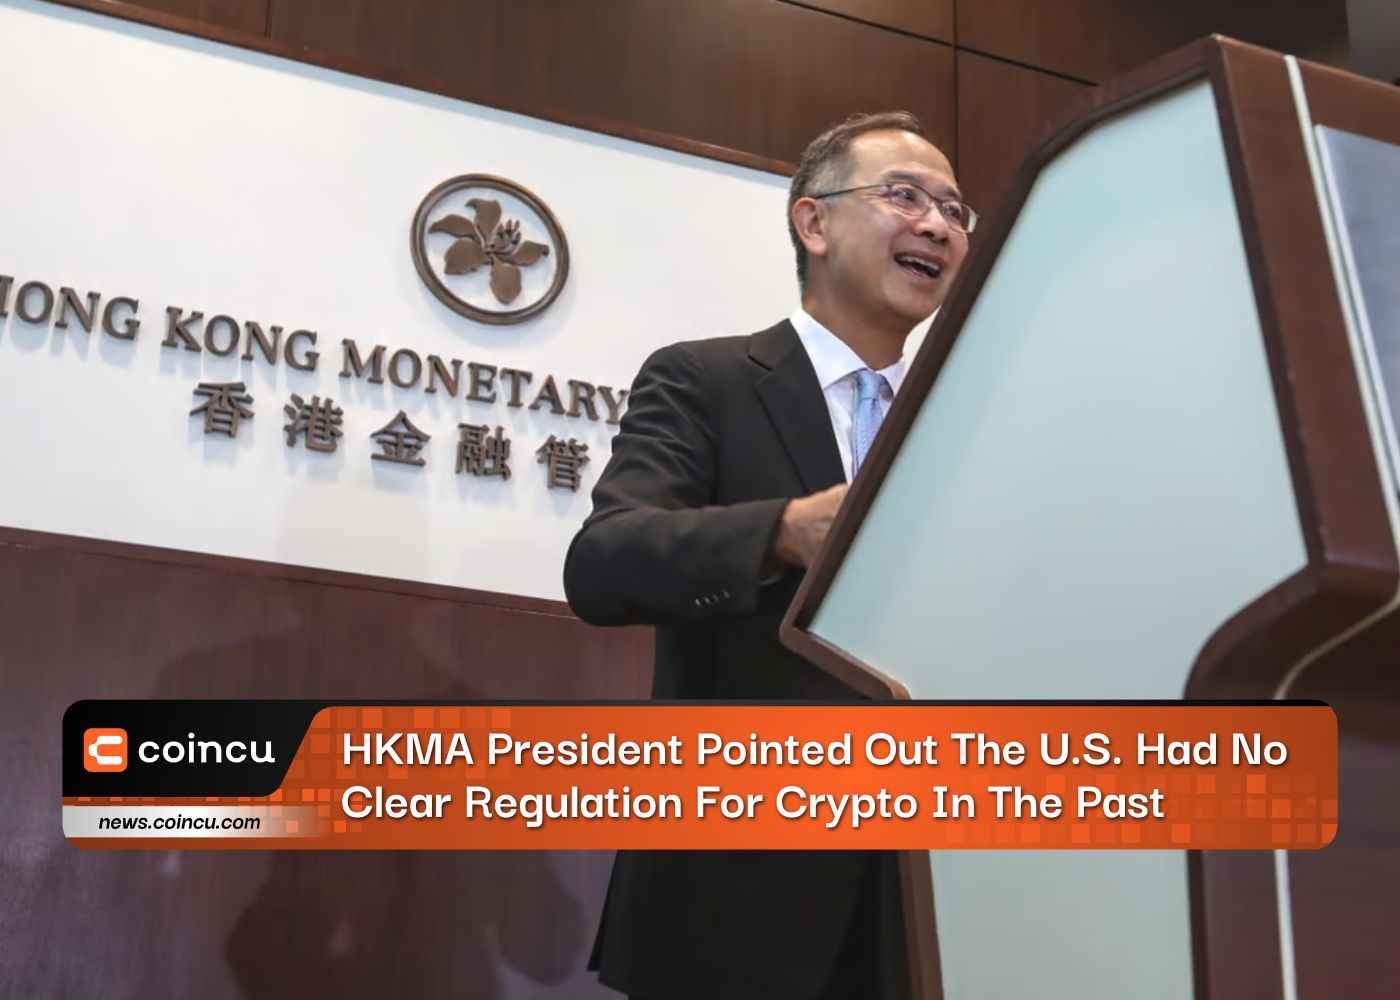 HKMA President Pointed Out The U.S. Had No Clear Regulation For Crypto In The Past